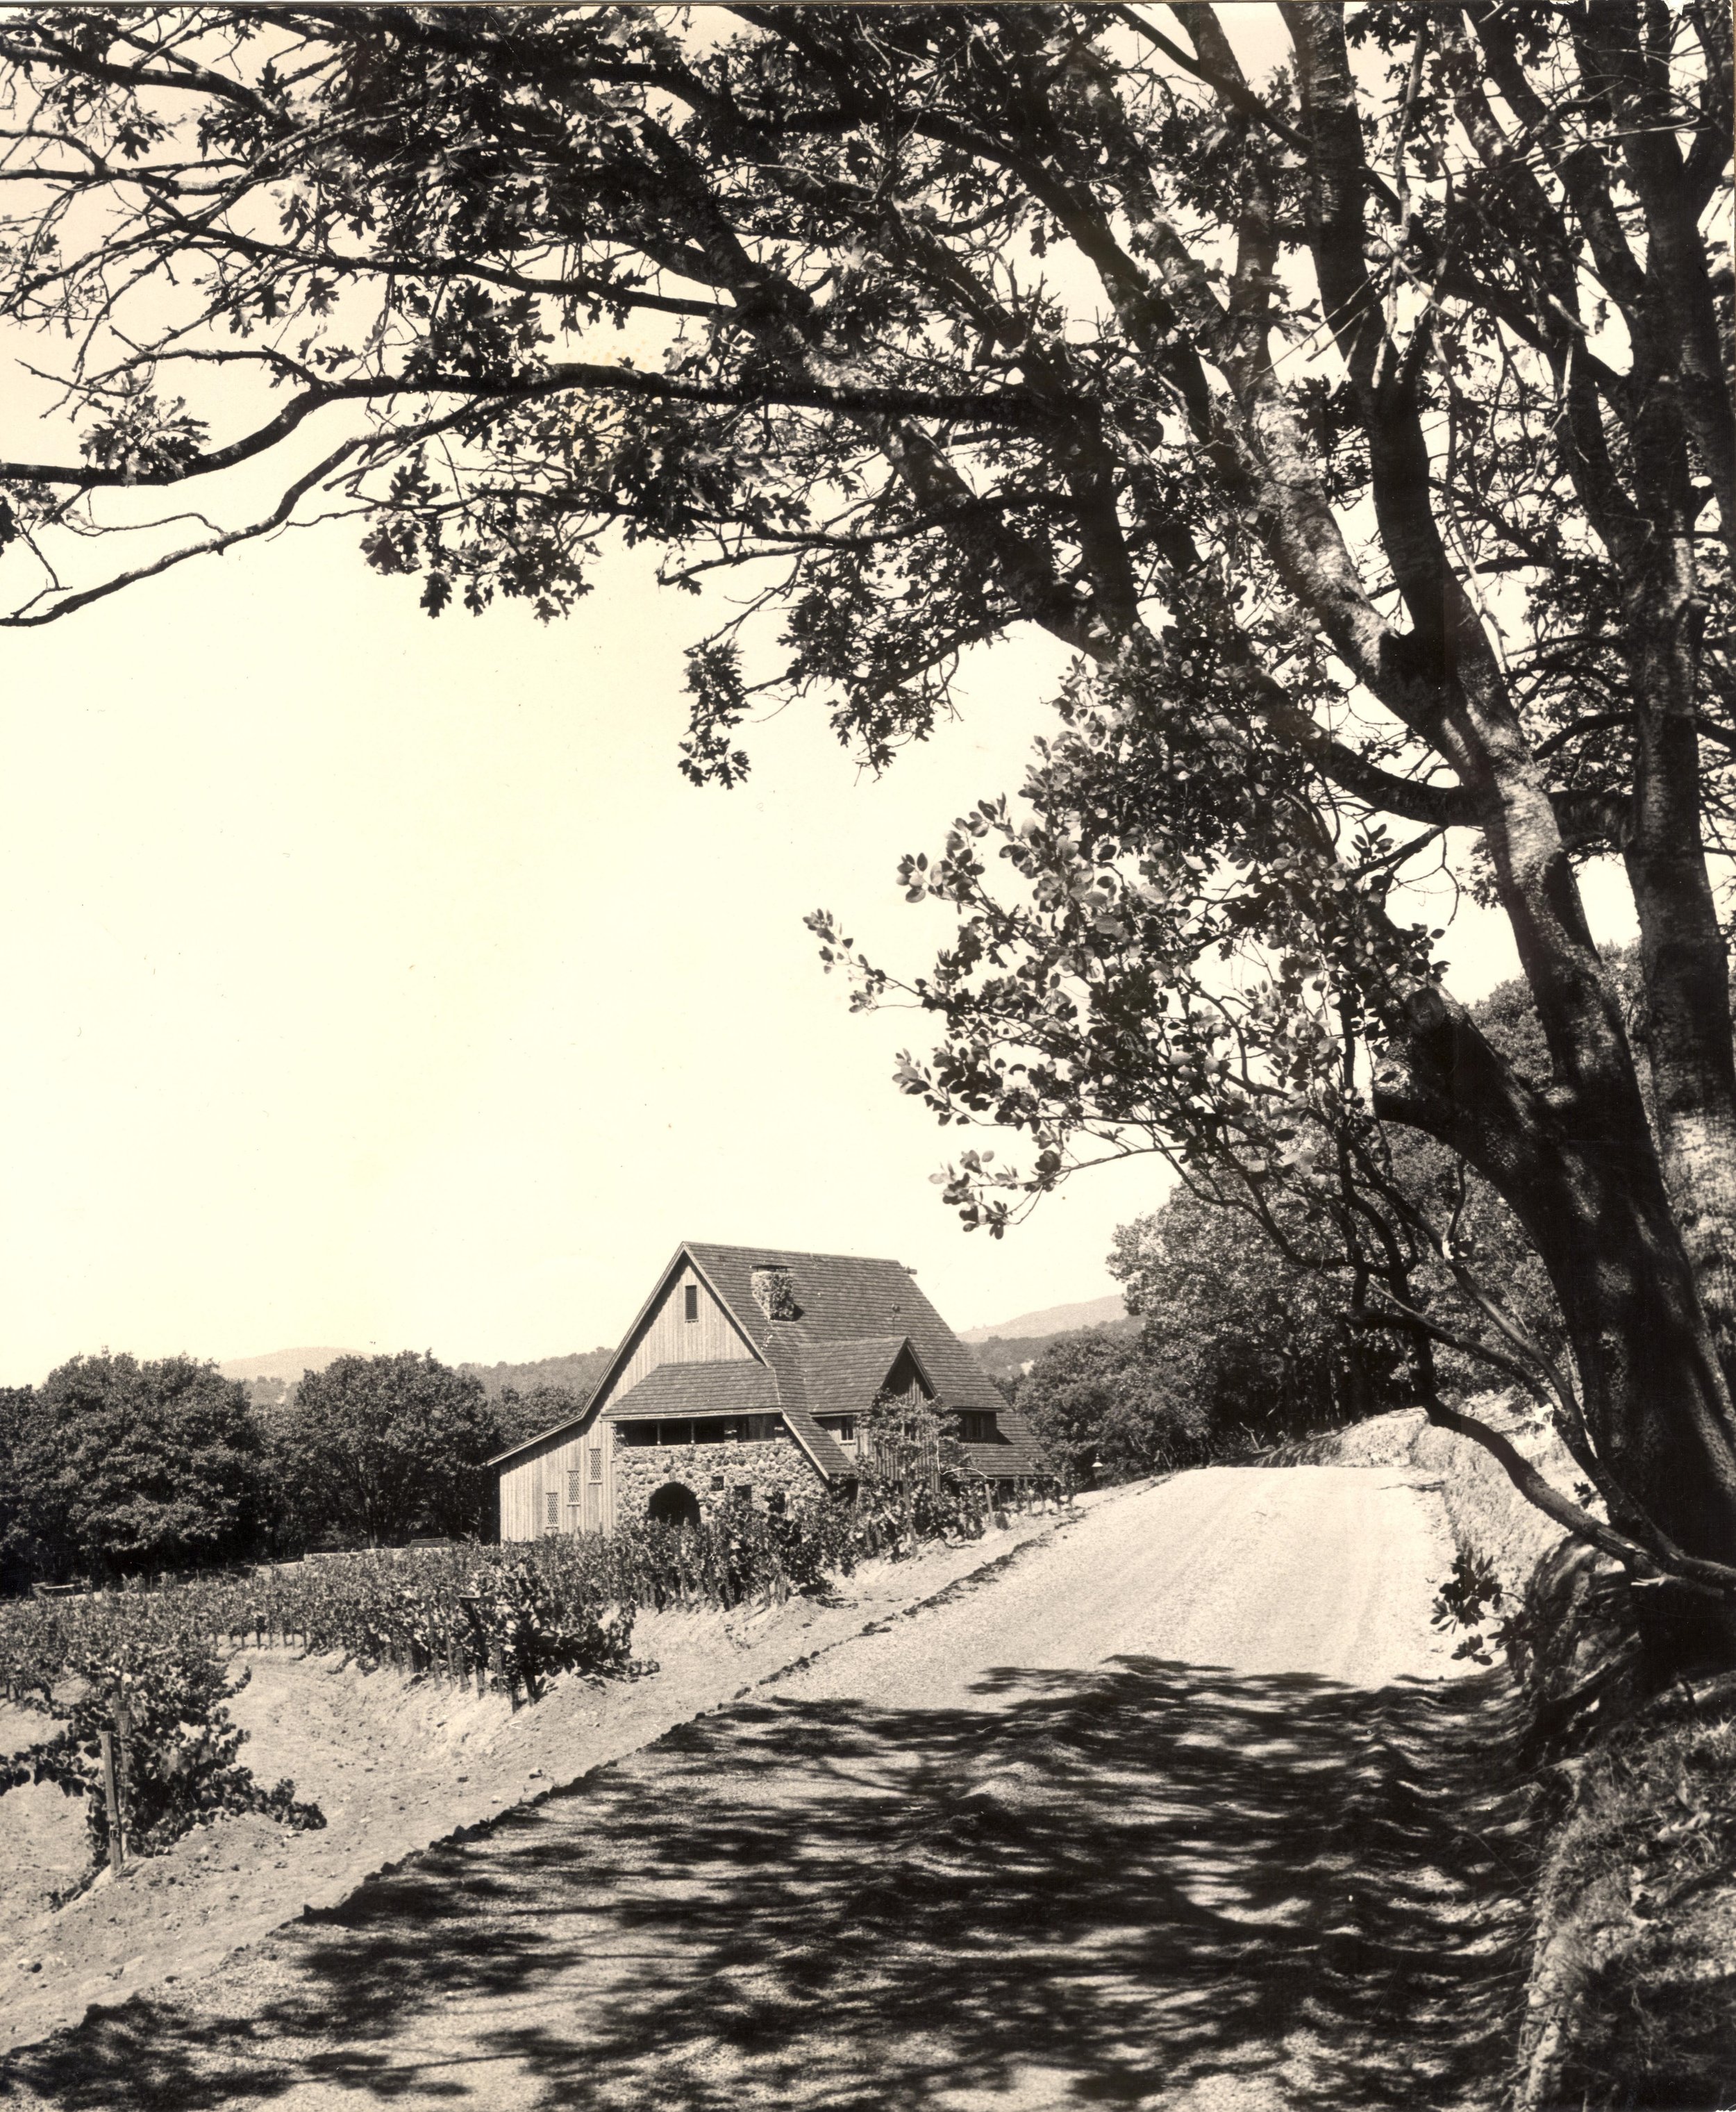 Black and White photo of Hanzell winery in 1950s